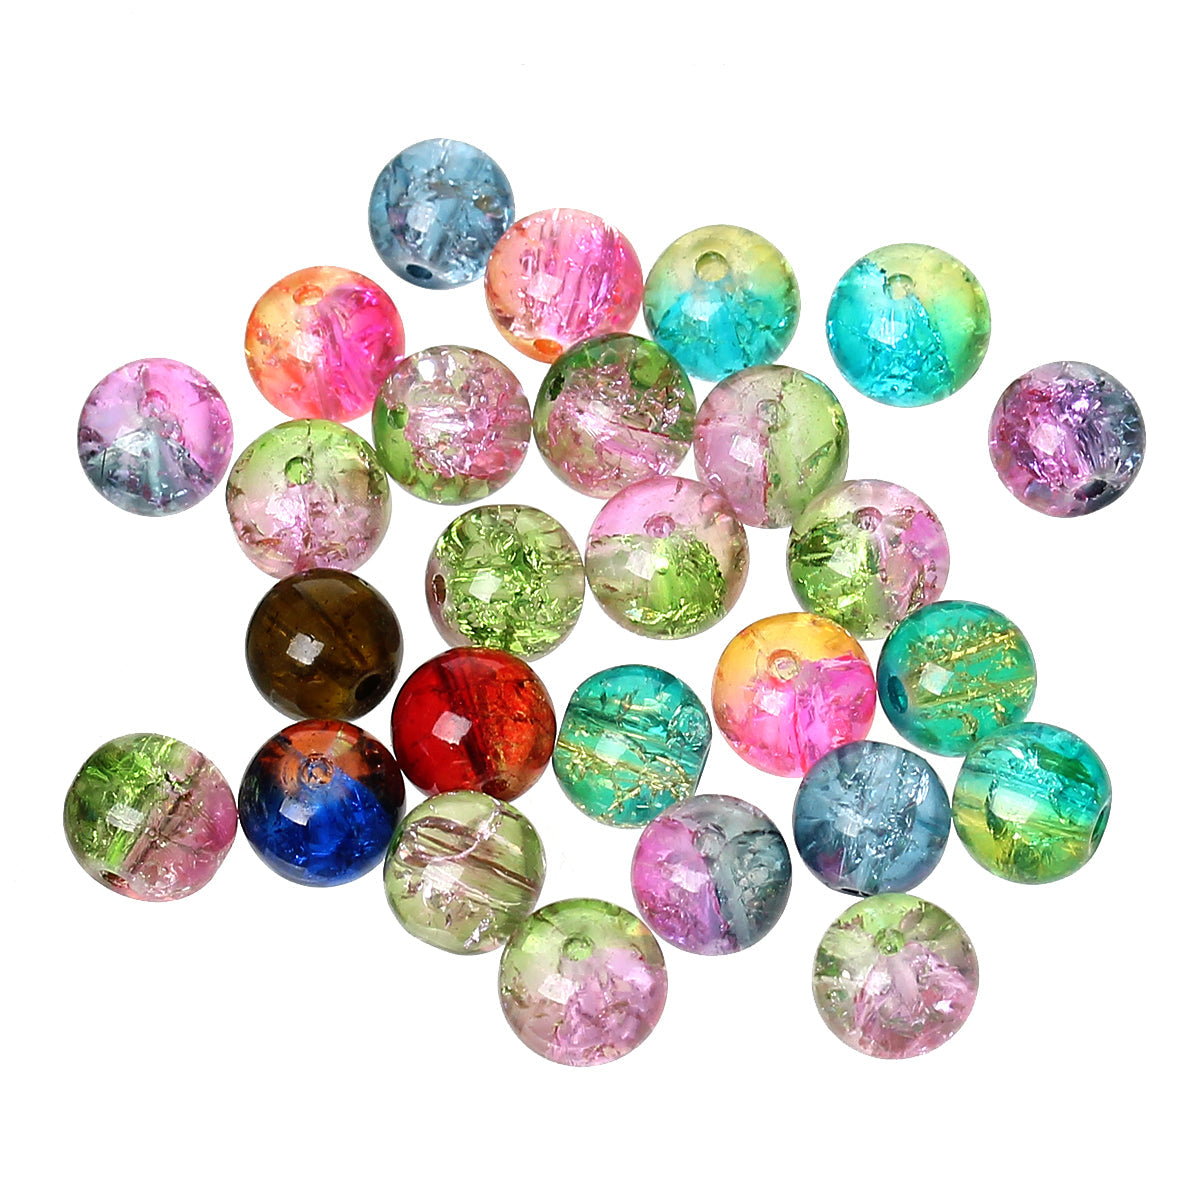 100 Two Tone Crackle Glass Beads - 8mm, Julz Beads